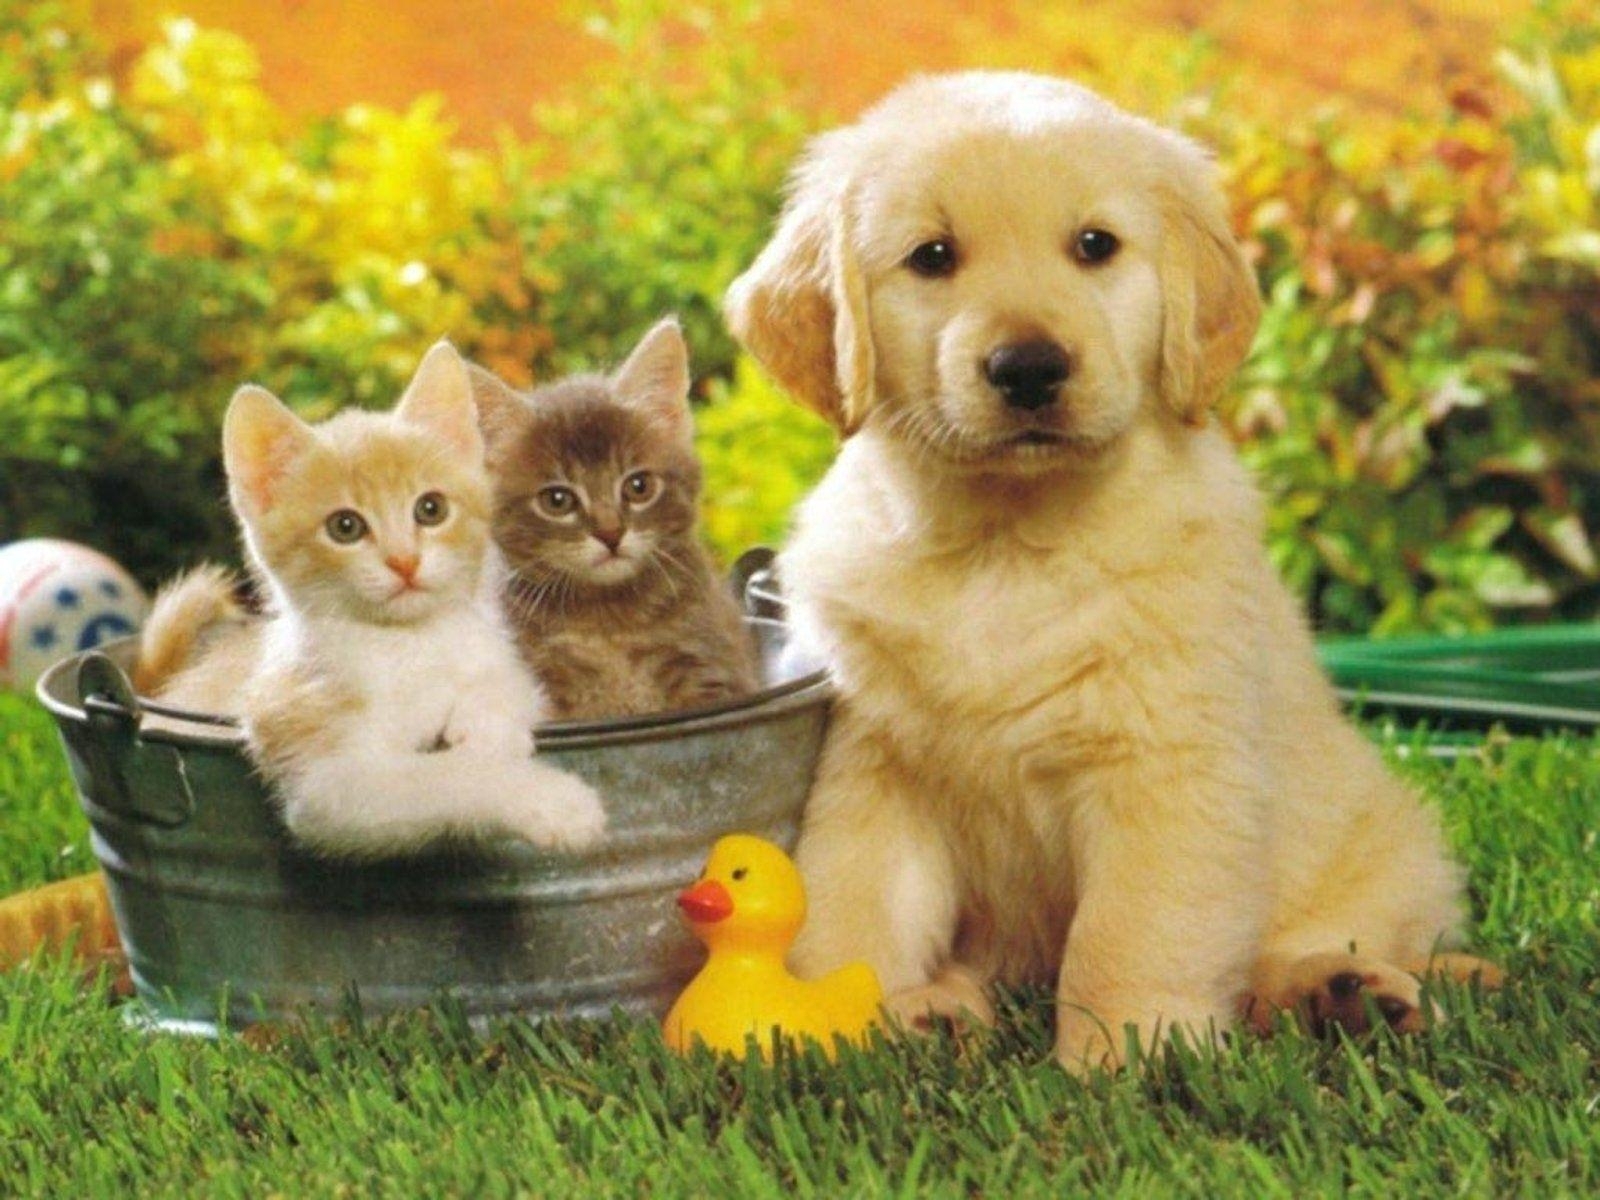 10 New Cute Puppies And Kittens Wallpaper FULL HD 1080p For PC Background